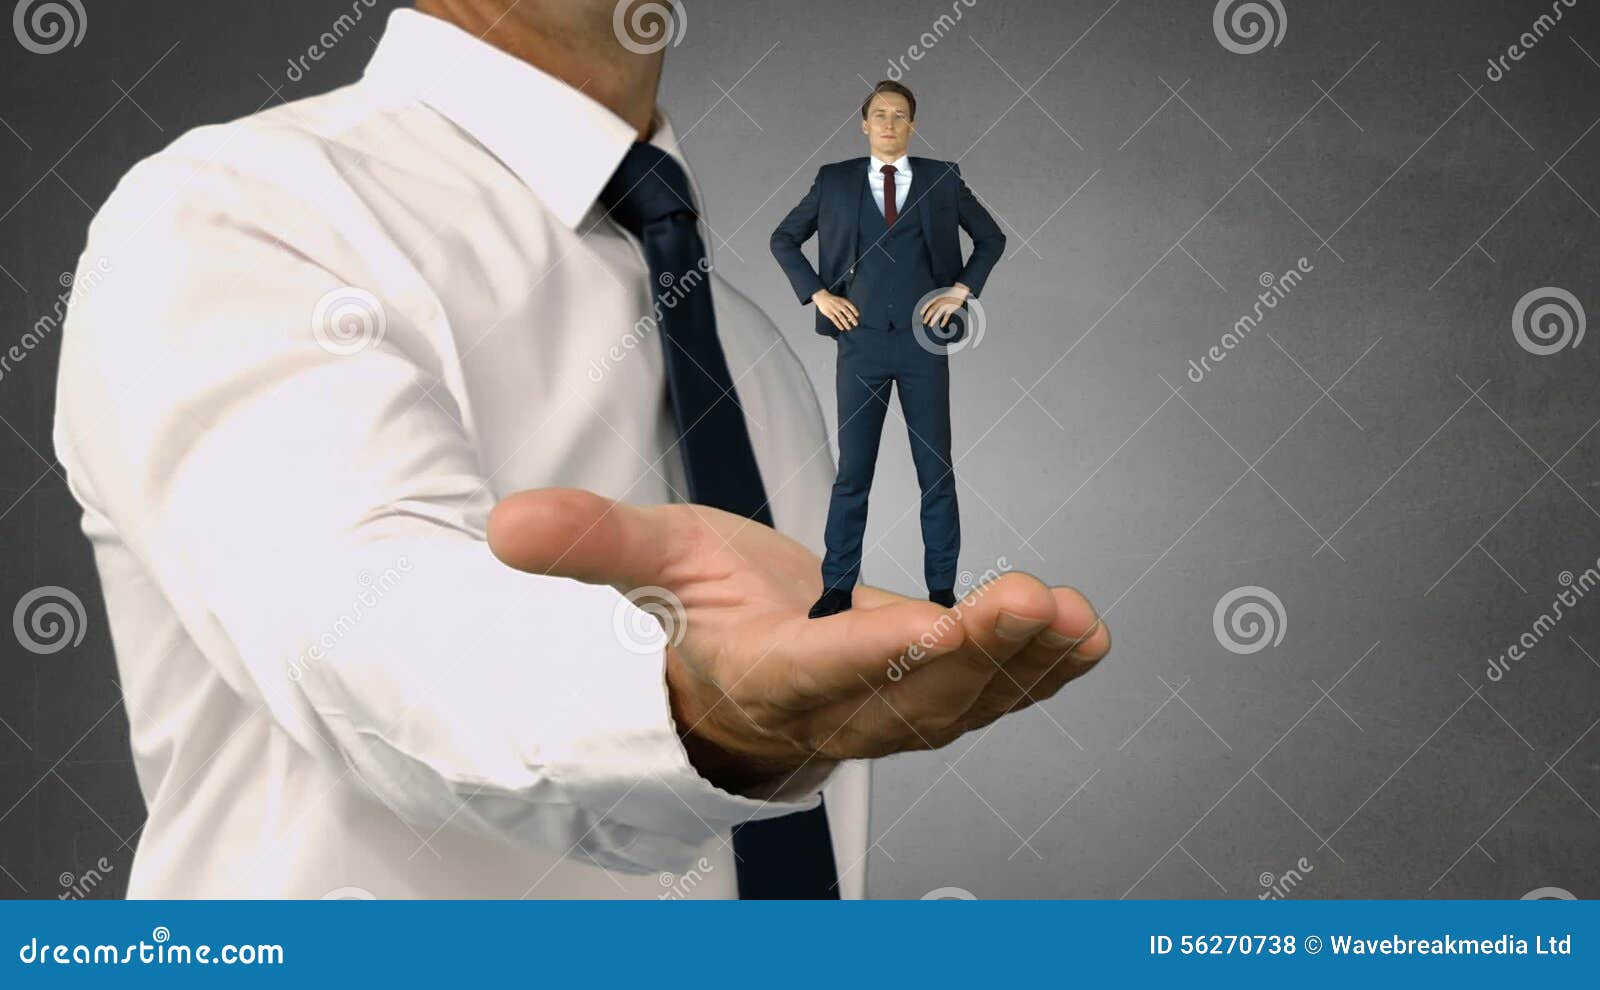 Giant Boss Holding Hands of Stock Footage - Video of corporate, 56270738